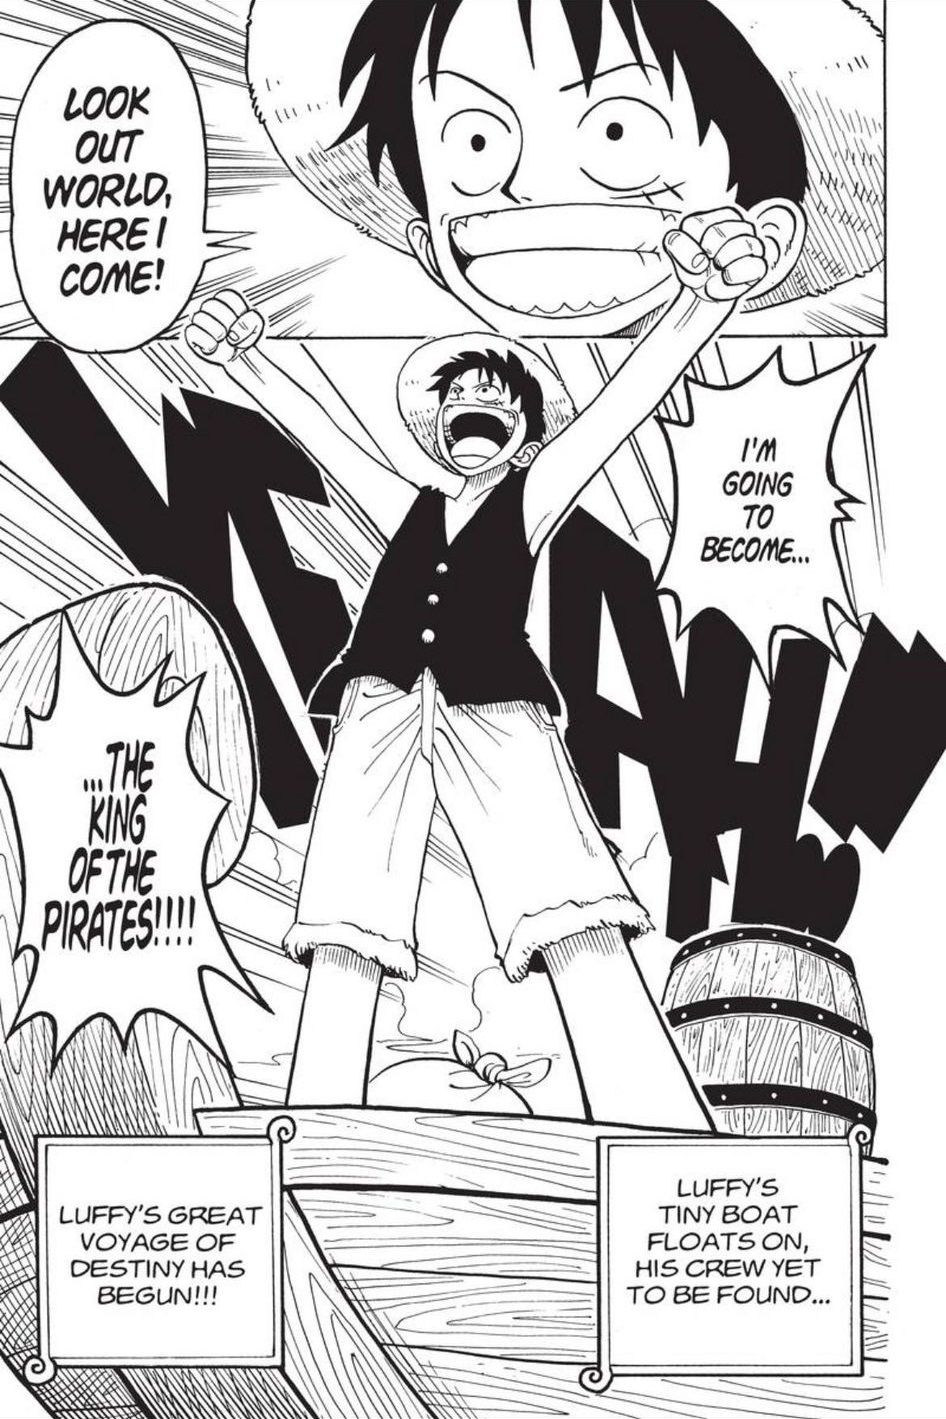 One Piece manga chapter 1, part 3 with Luffy holding his arms out